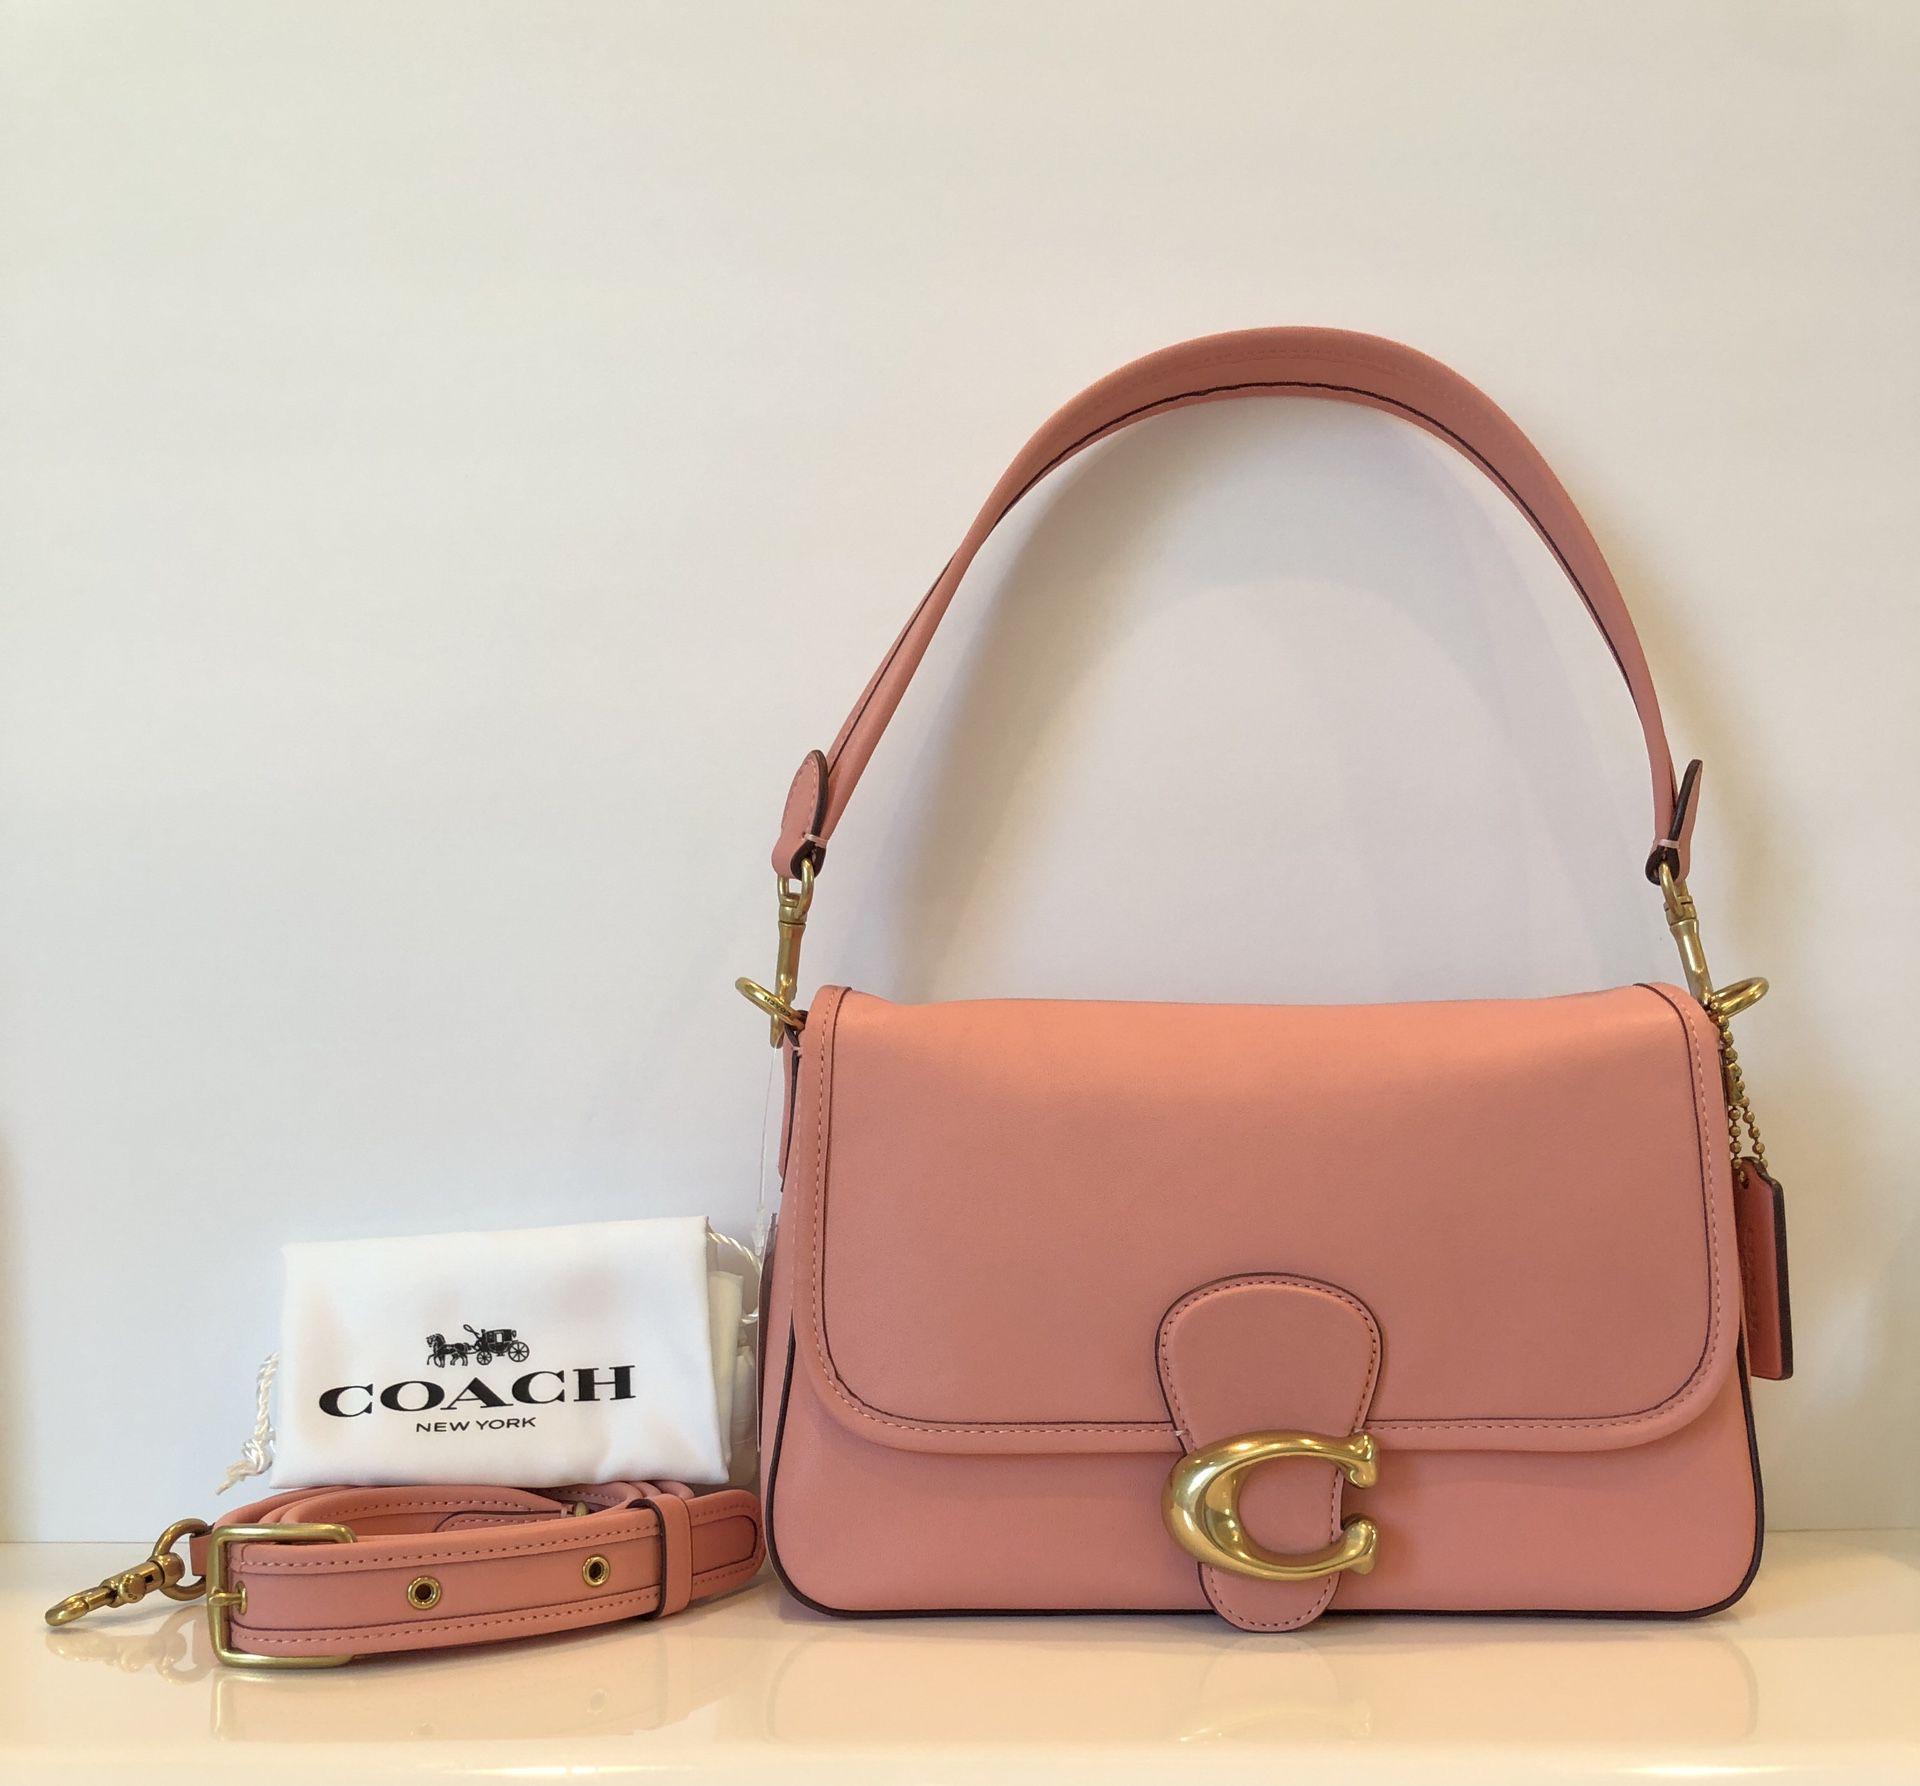 NWT COACH C4823 Leather Soft Tabby Bag with 2 Straps - Candy Pink